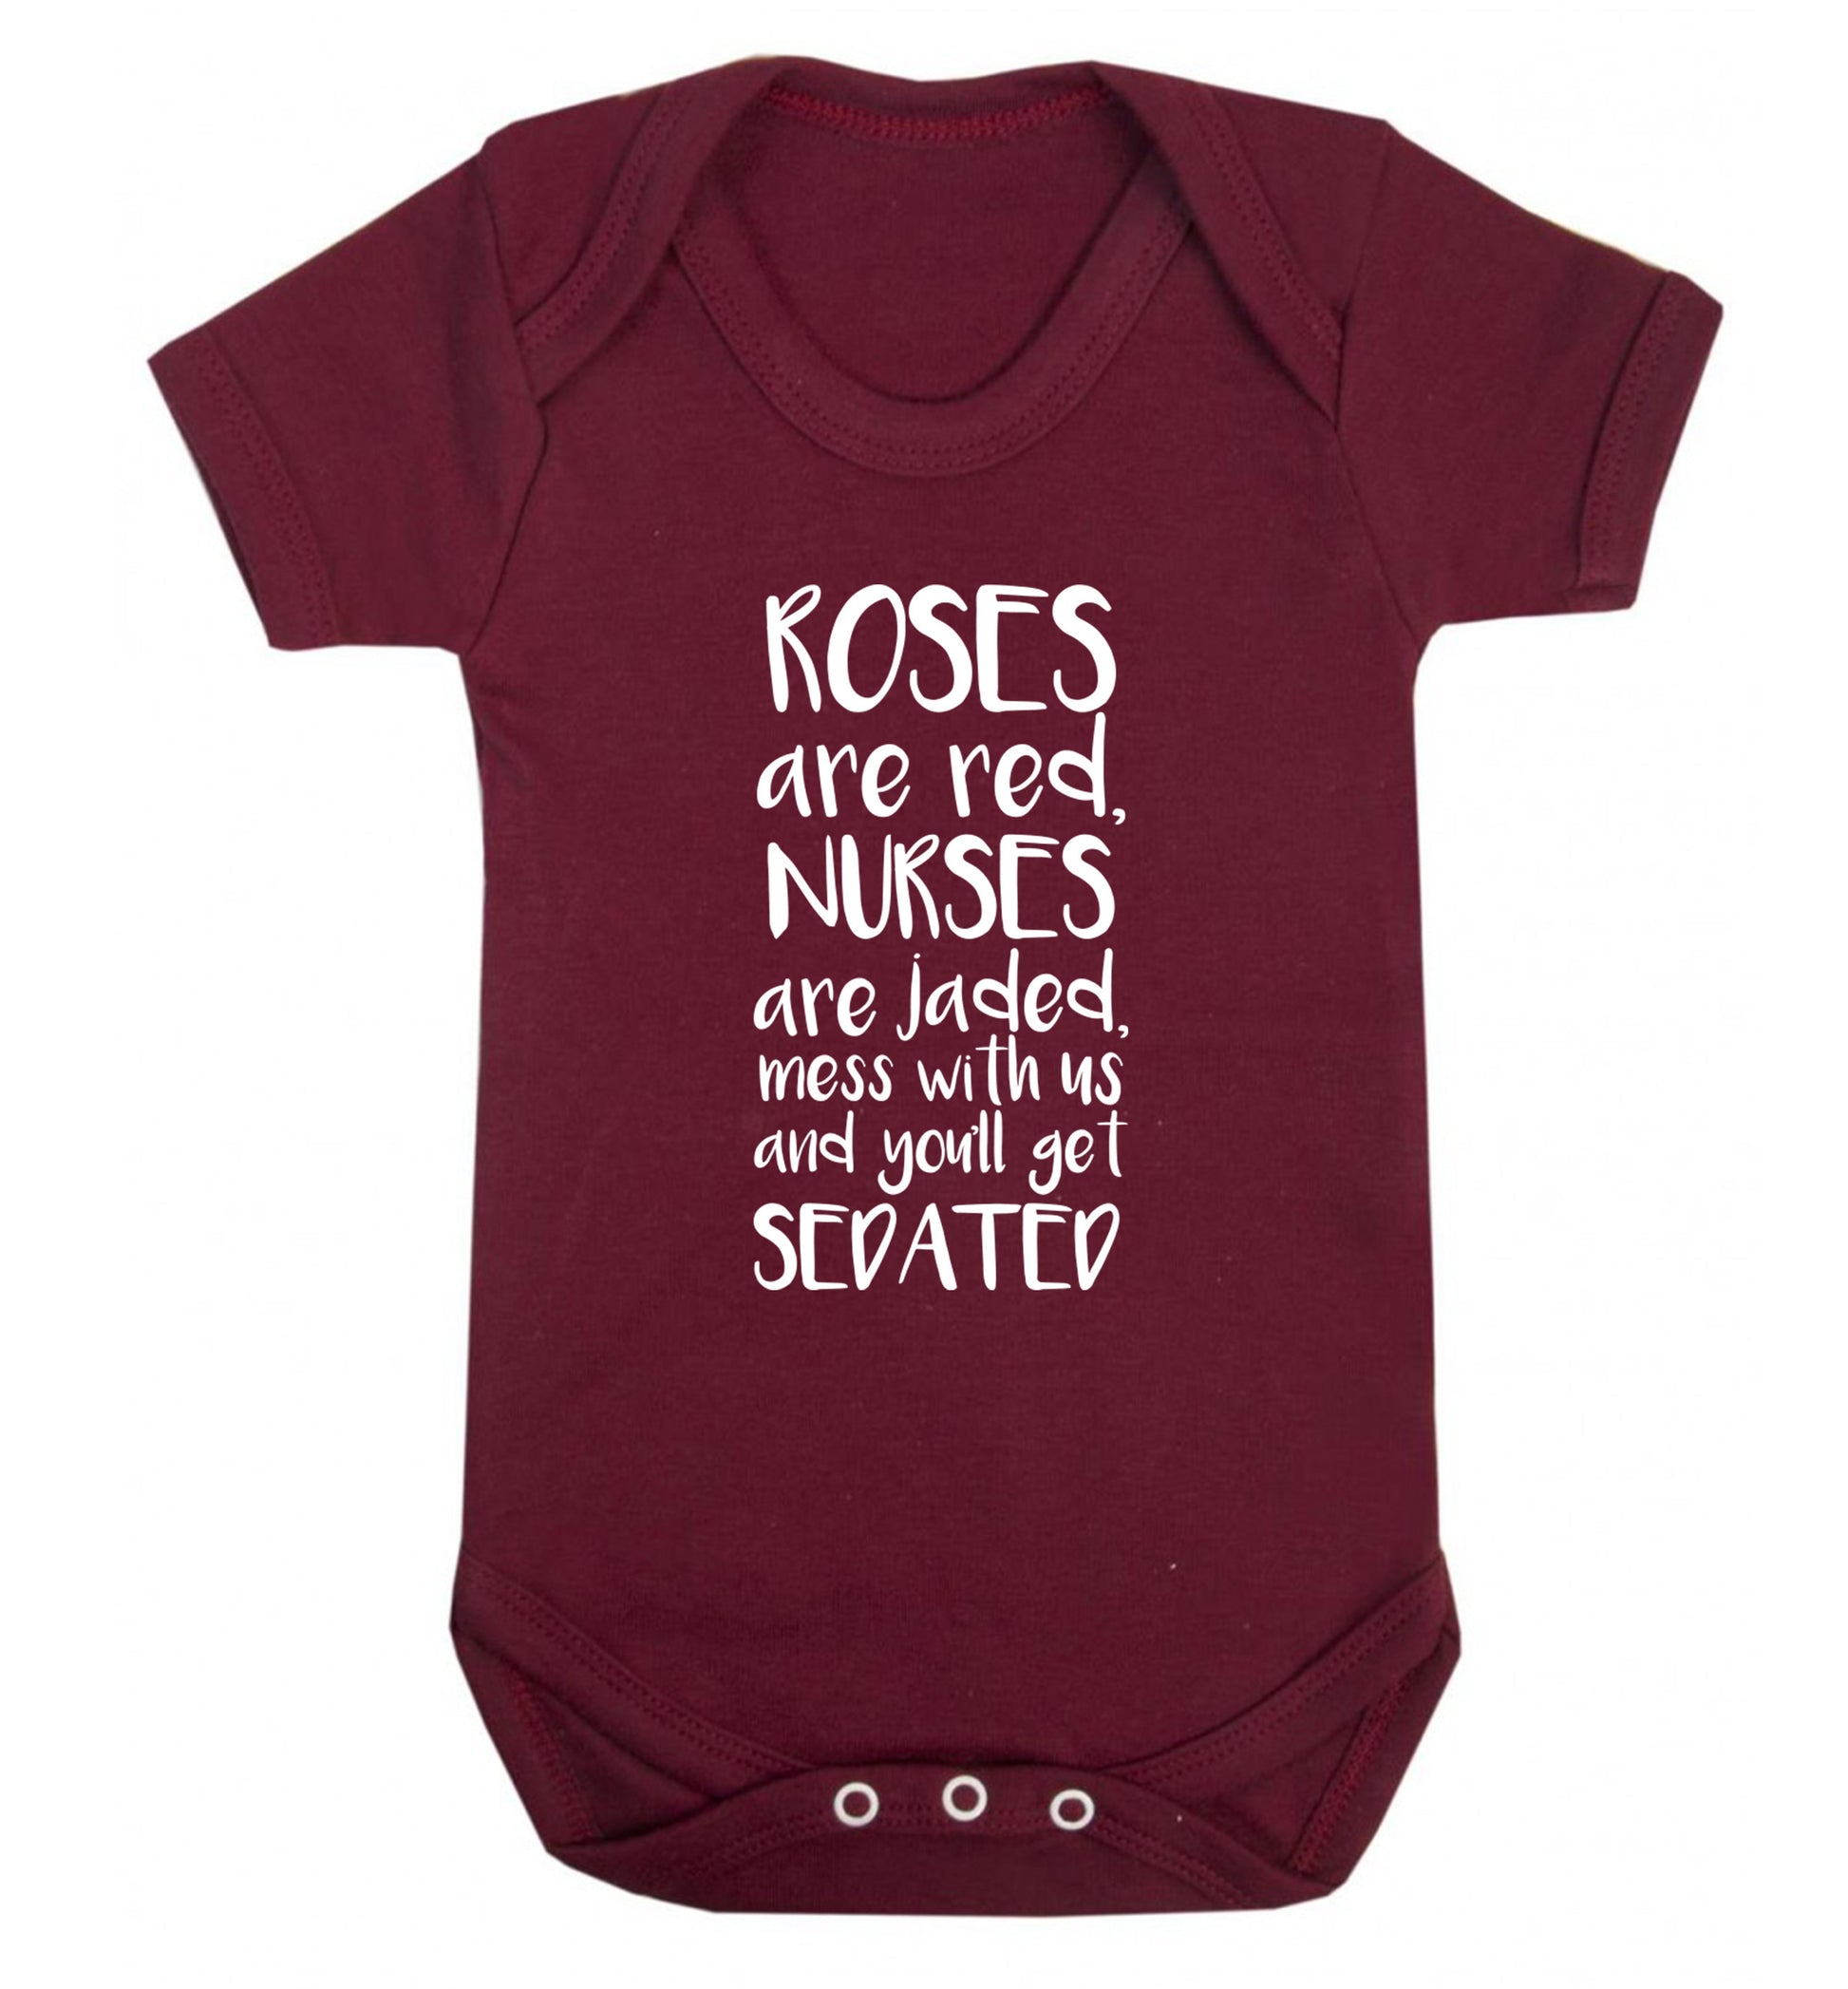 Roses are red, nurses are jaded, mess with us and you'll get sedated Baby Vest maroon 18-24 months